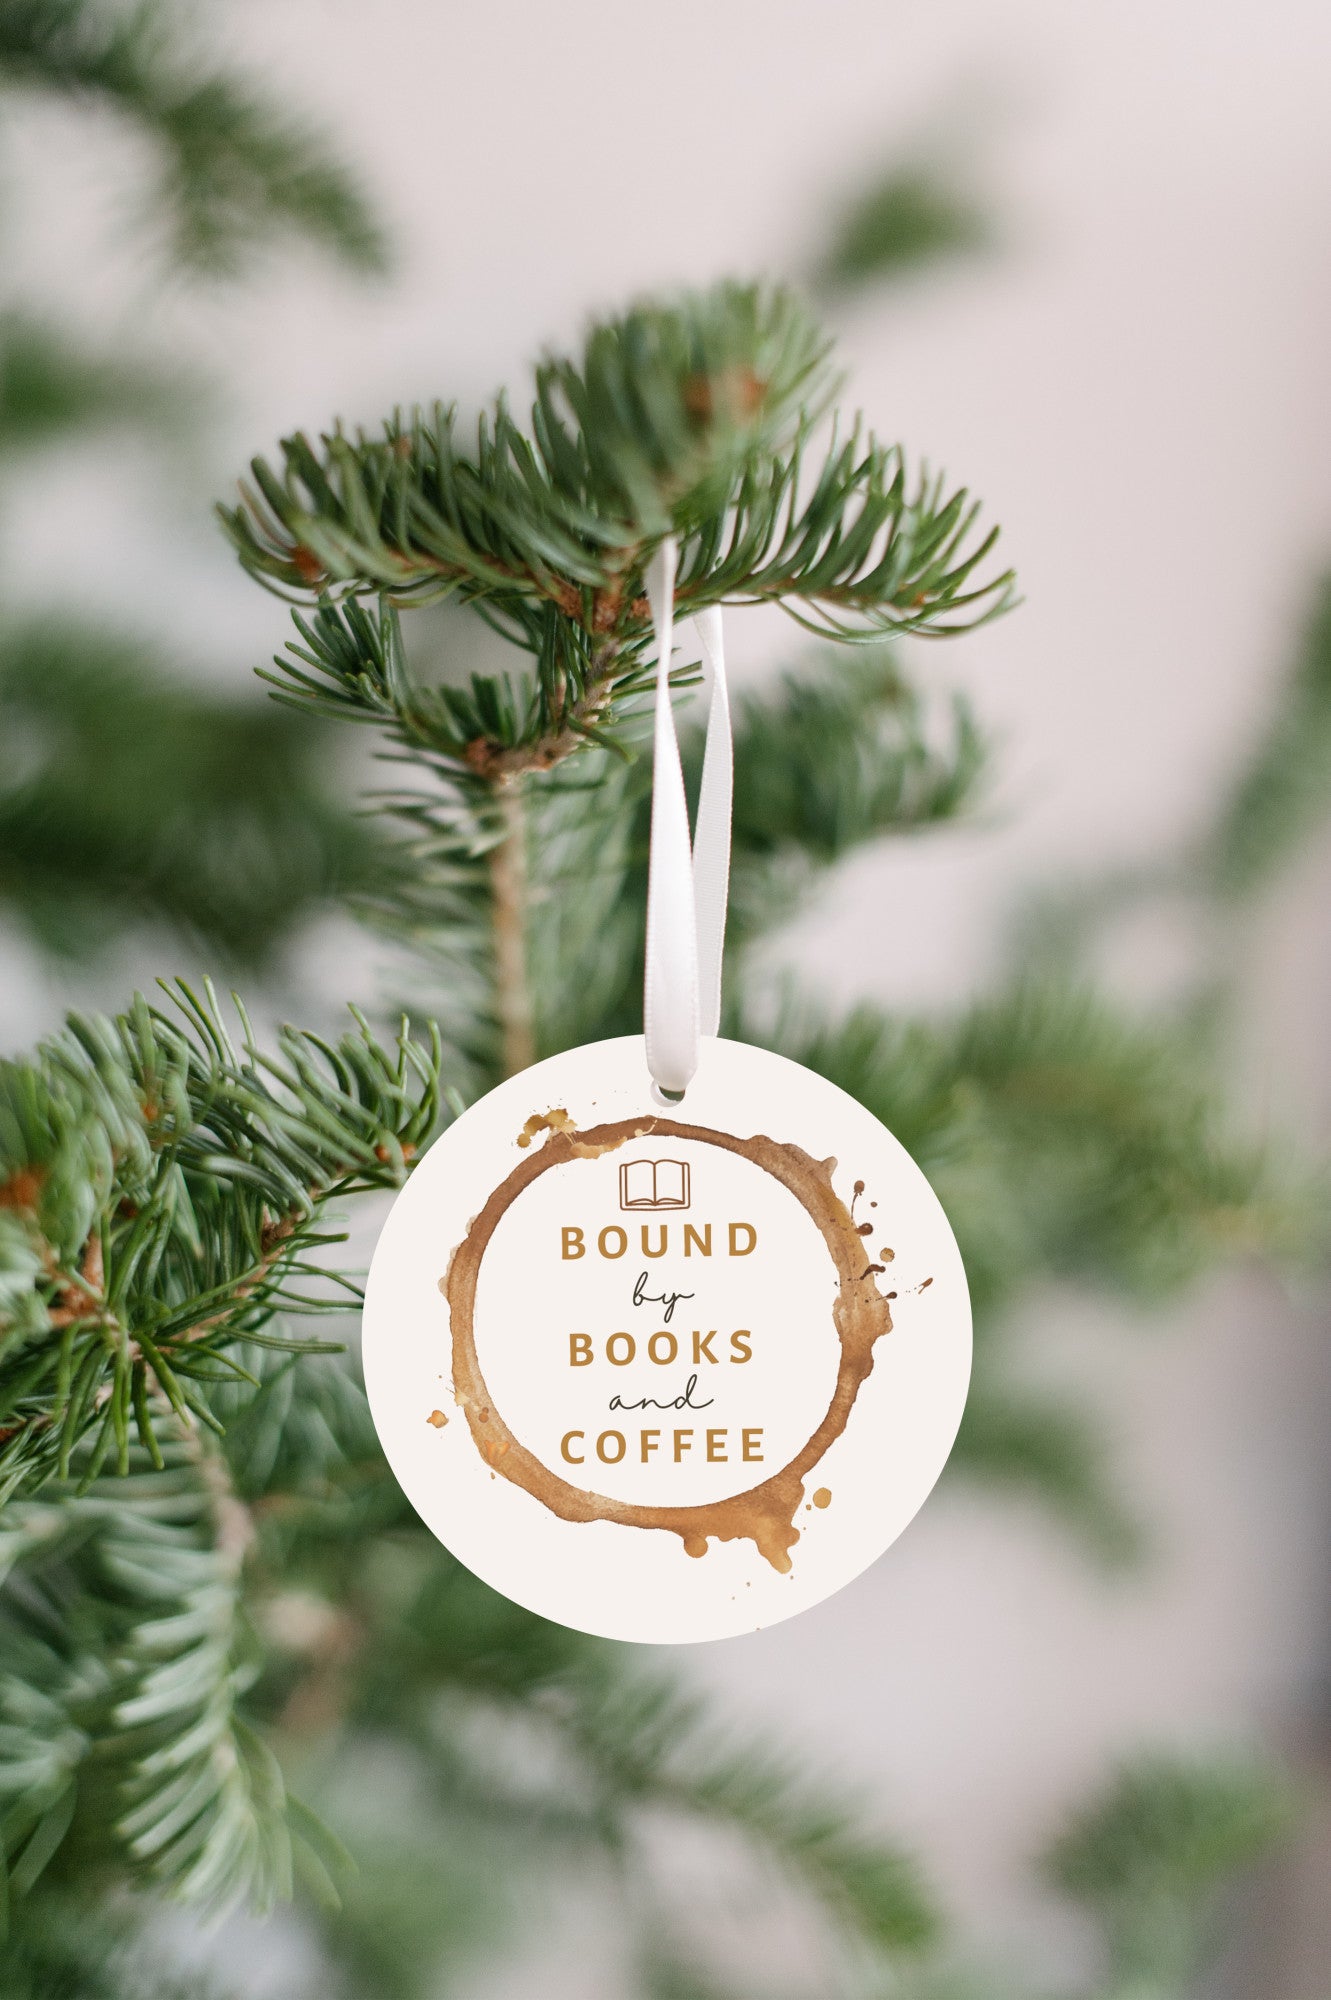 Book Lovers 1/8" Ornament - FREE SHIPPING! Buy 3 Ornaments Get 10% Off, Buy 5 Ornaments Get 20% Off, Buy 10 Ornaments Get 30% Off! Discounts Applied Automatically At Checkout